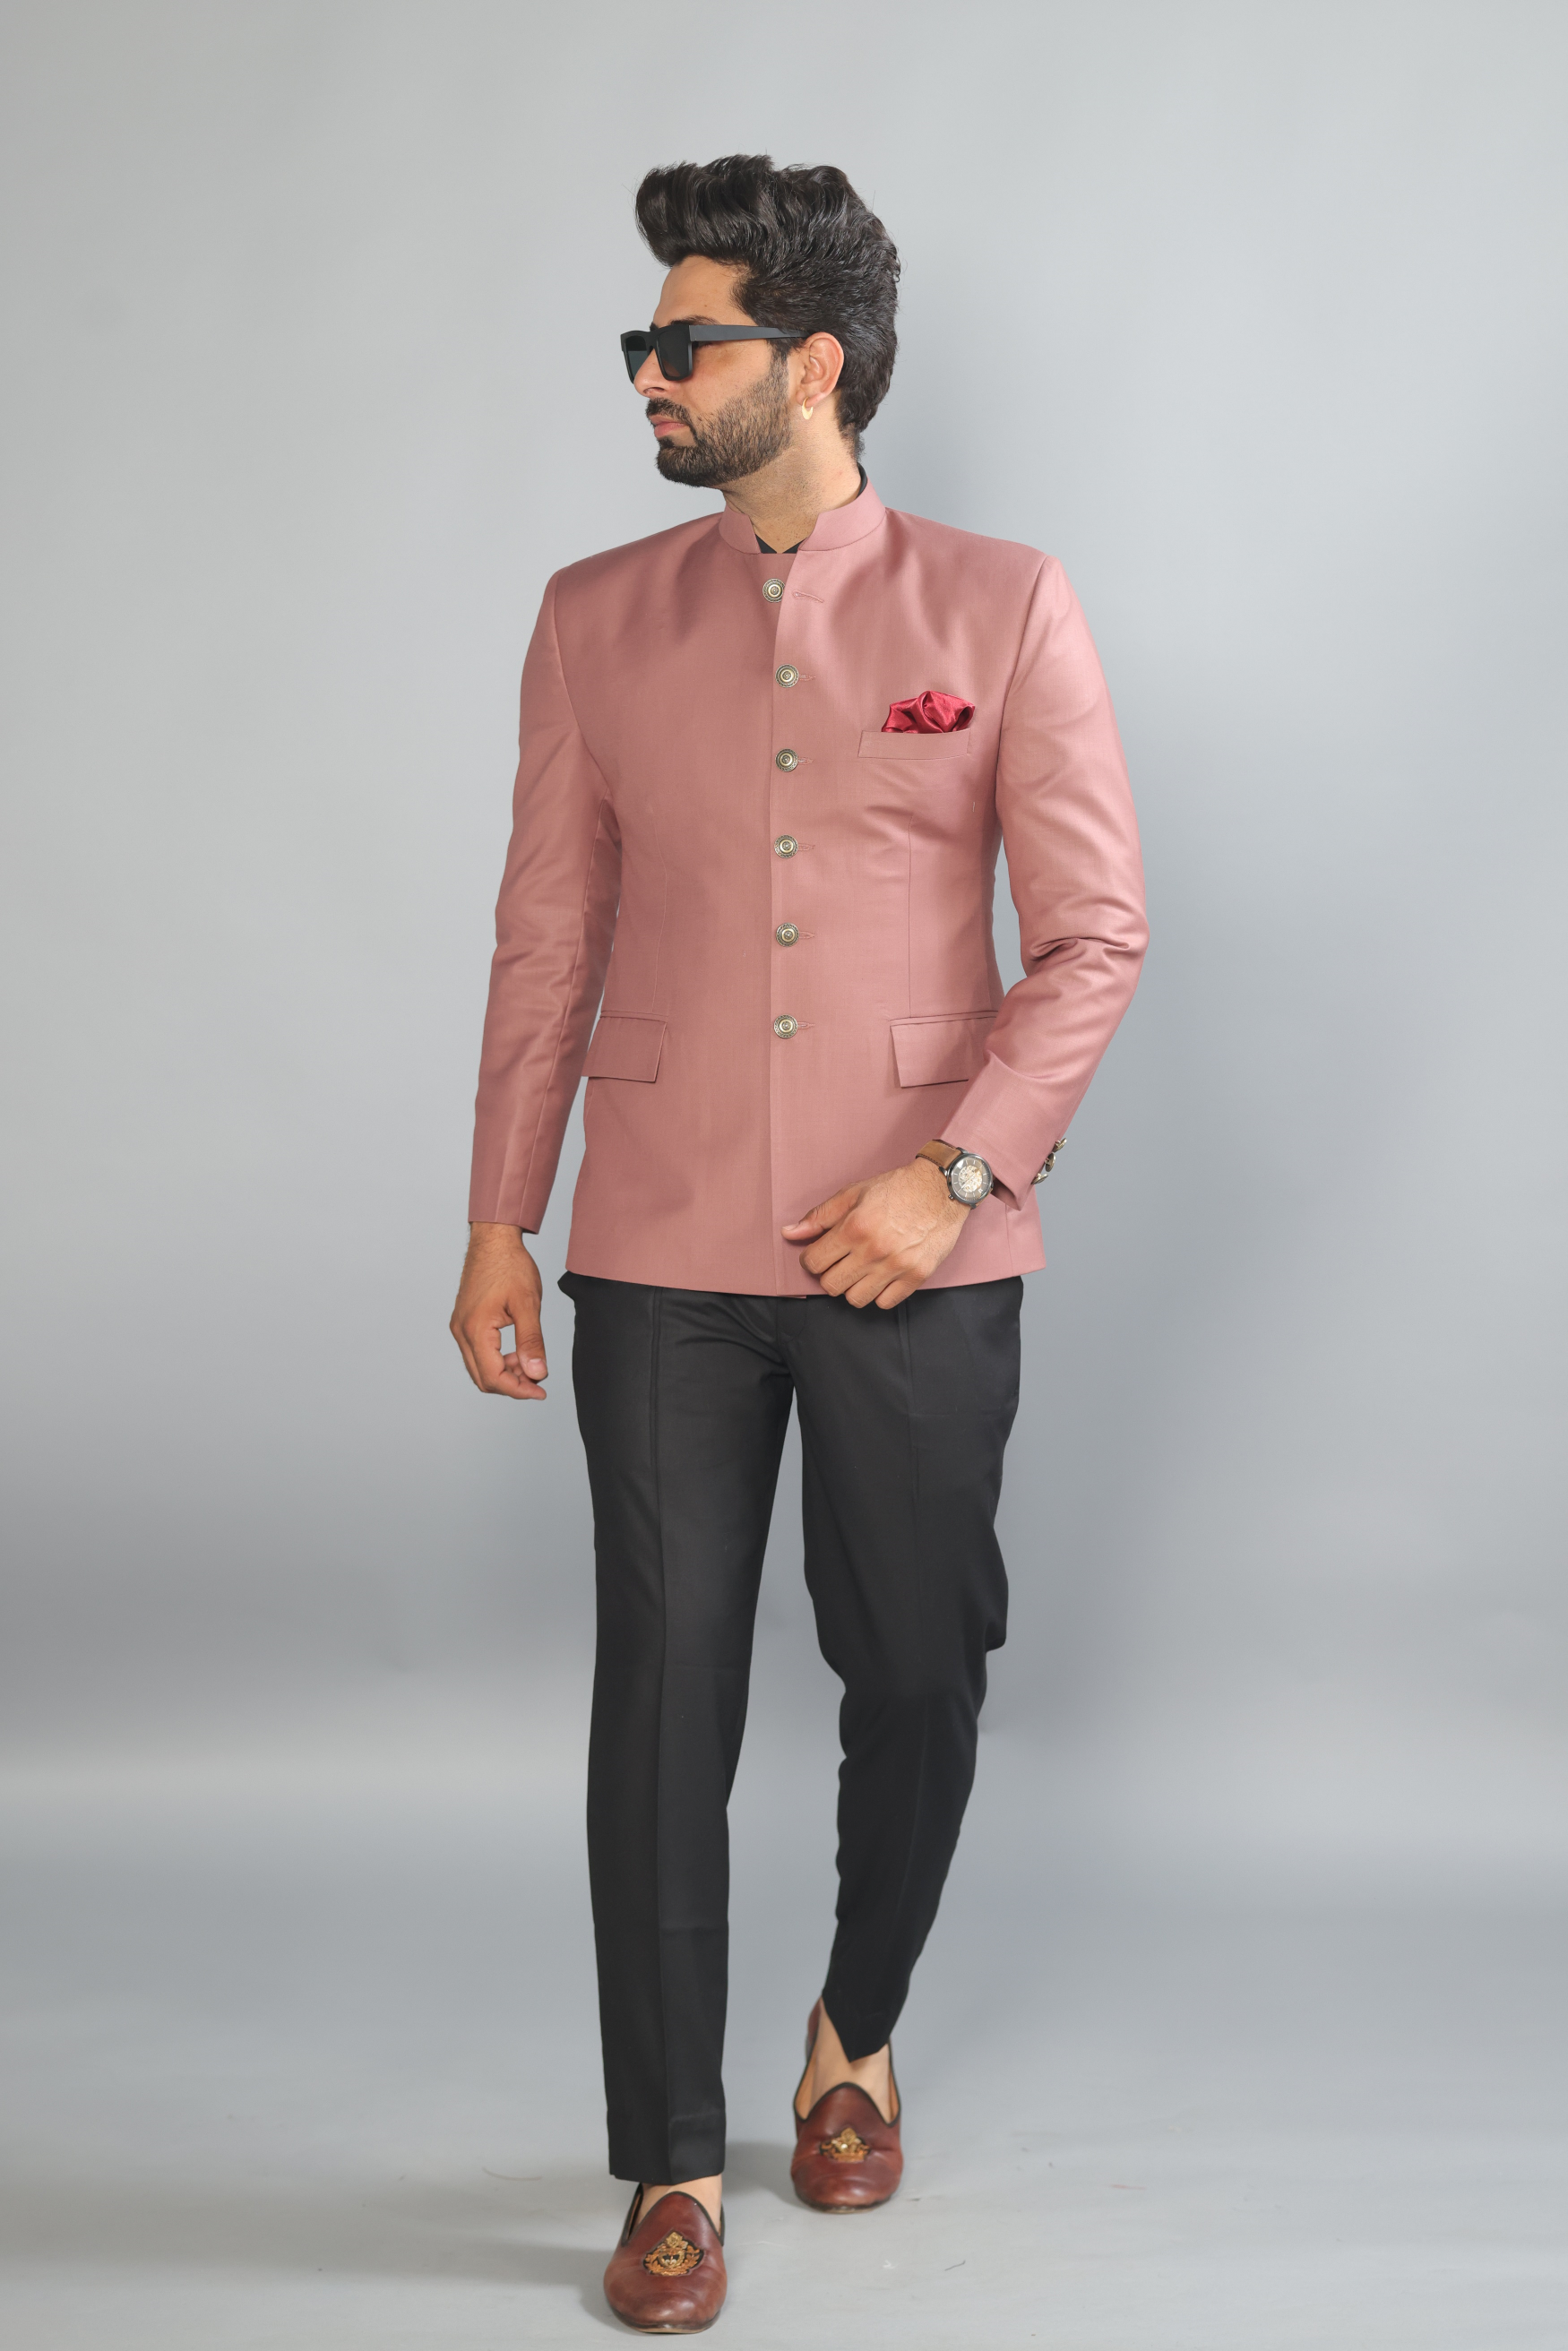 Exclusive Rosewood Jodhpuri Bandh gala with Black Trouser | Perfect Wedding and Party Wear | Free Personalisation